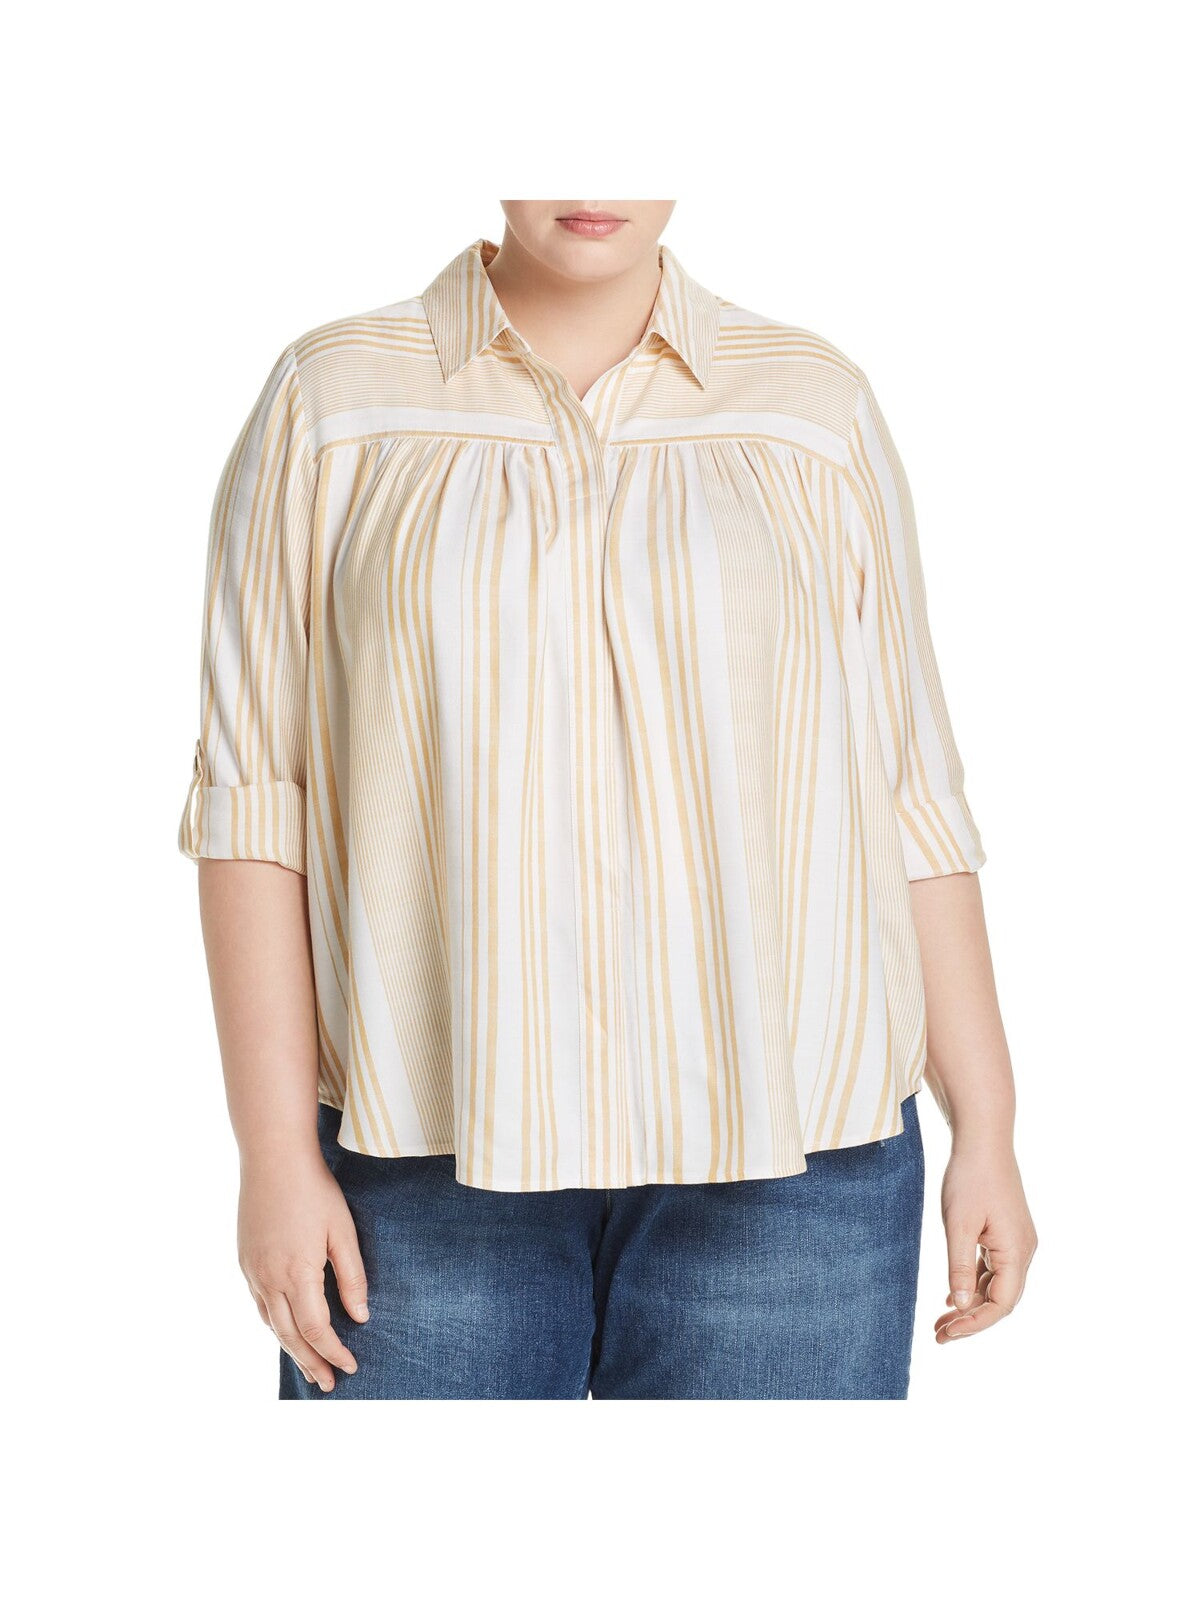 CUPIO BLUSH Womens Ivory Pleated Curved Hem Striped Roll-tab Sleeve Collared Button Up Top Plus 1X